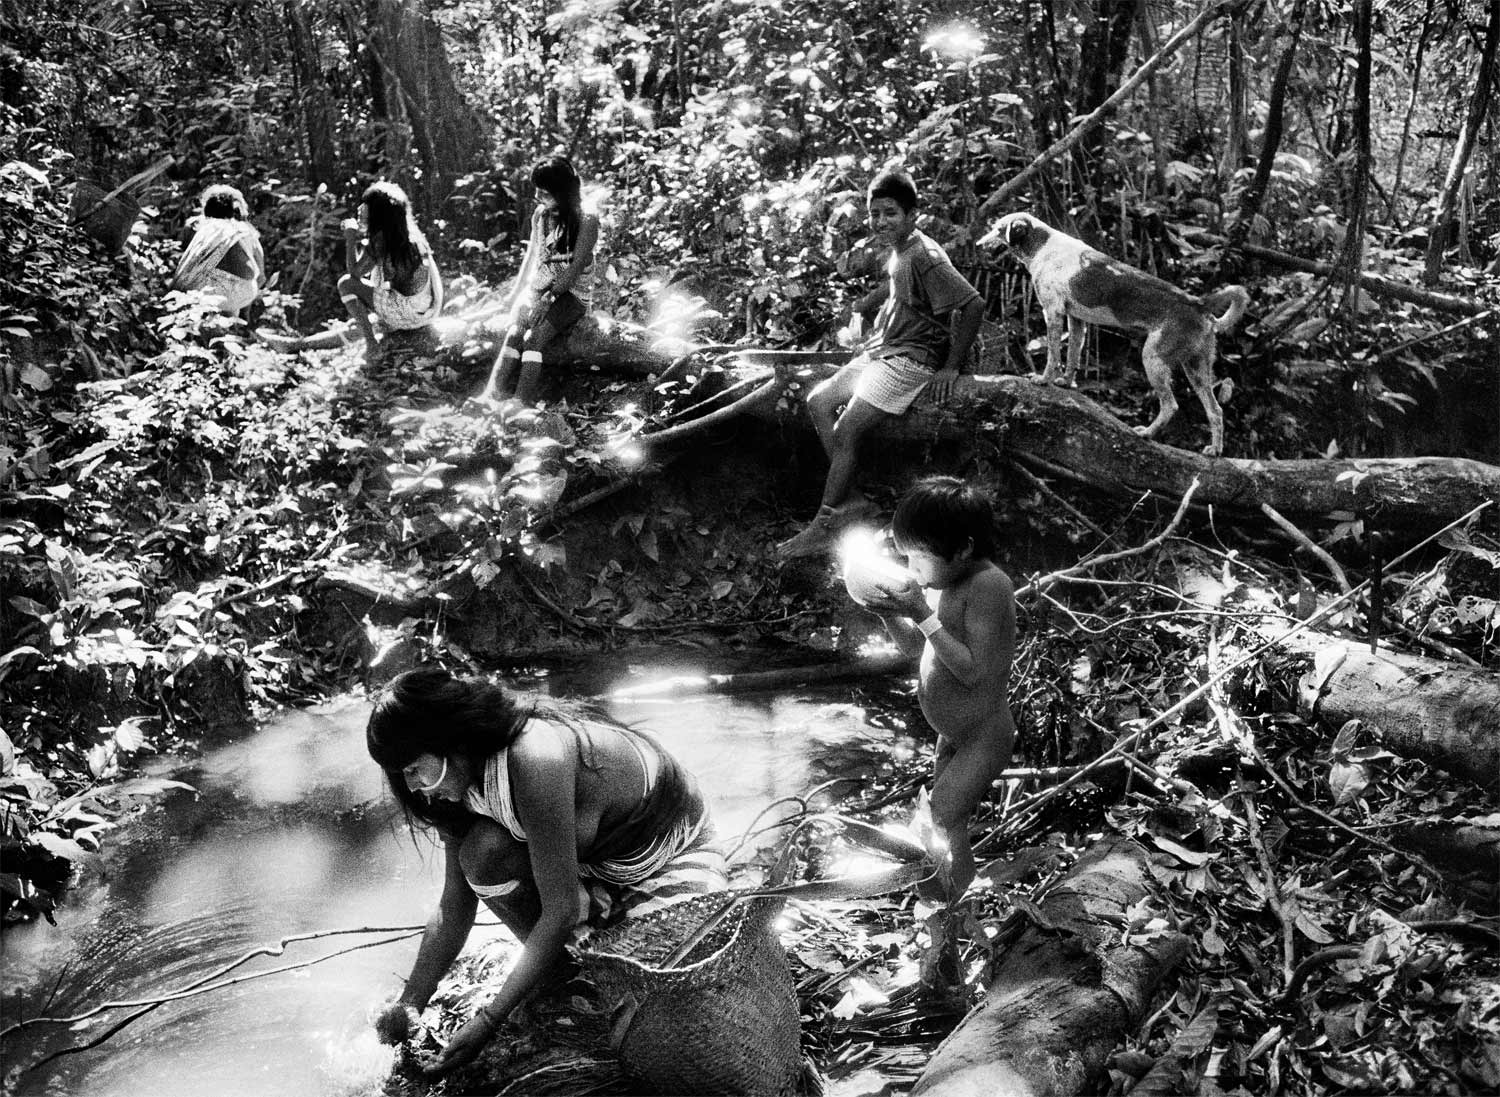 Sebastiao Salgado's critically acclaimed Amazonia exhibition opens at the Science and Industry Museum